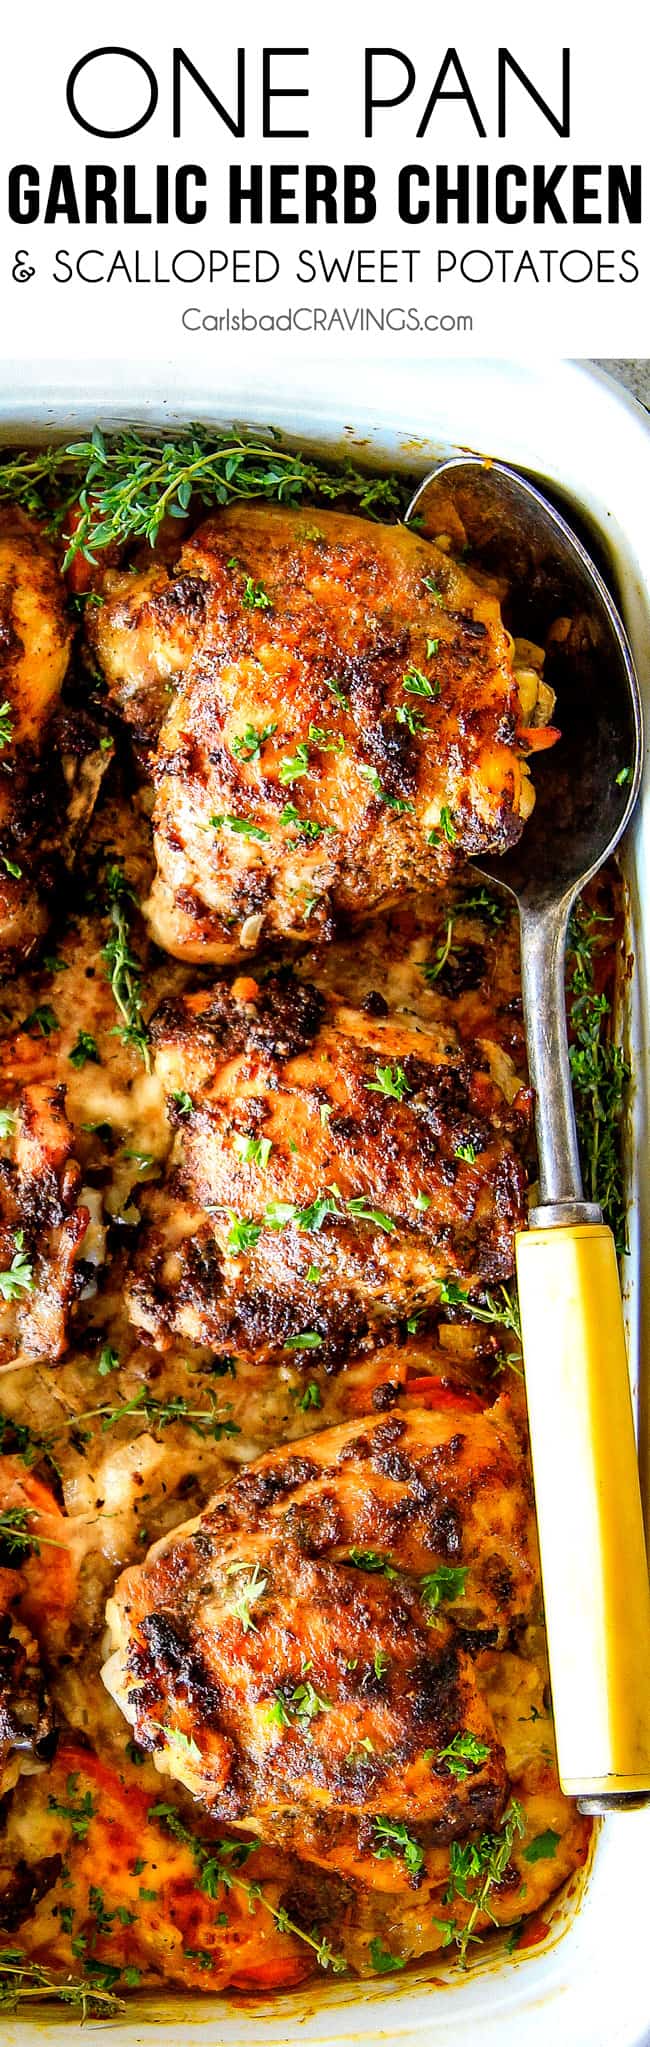 Juicy Garlic Herb Chicken baked in ONE PAN with Parmesan mozzarella Scalloped Sweet Potatoes!   This is one of my favorite dinners ever!  so much flavor and a meal-in-one!